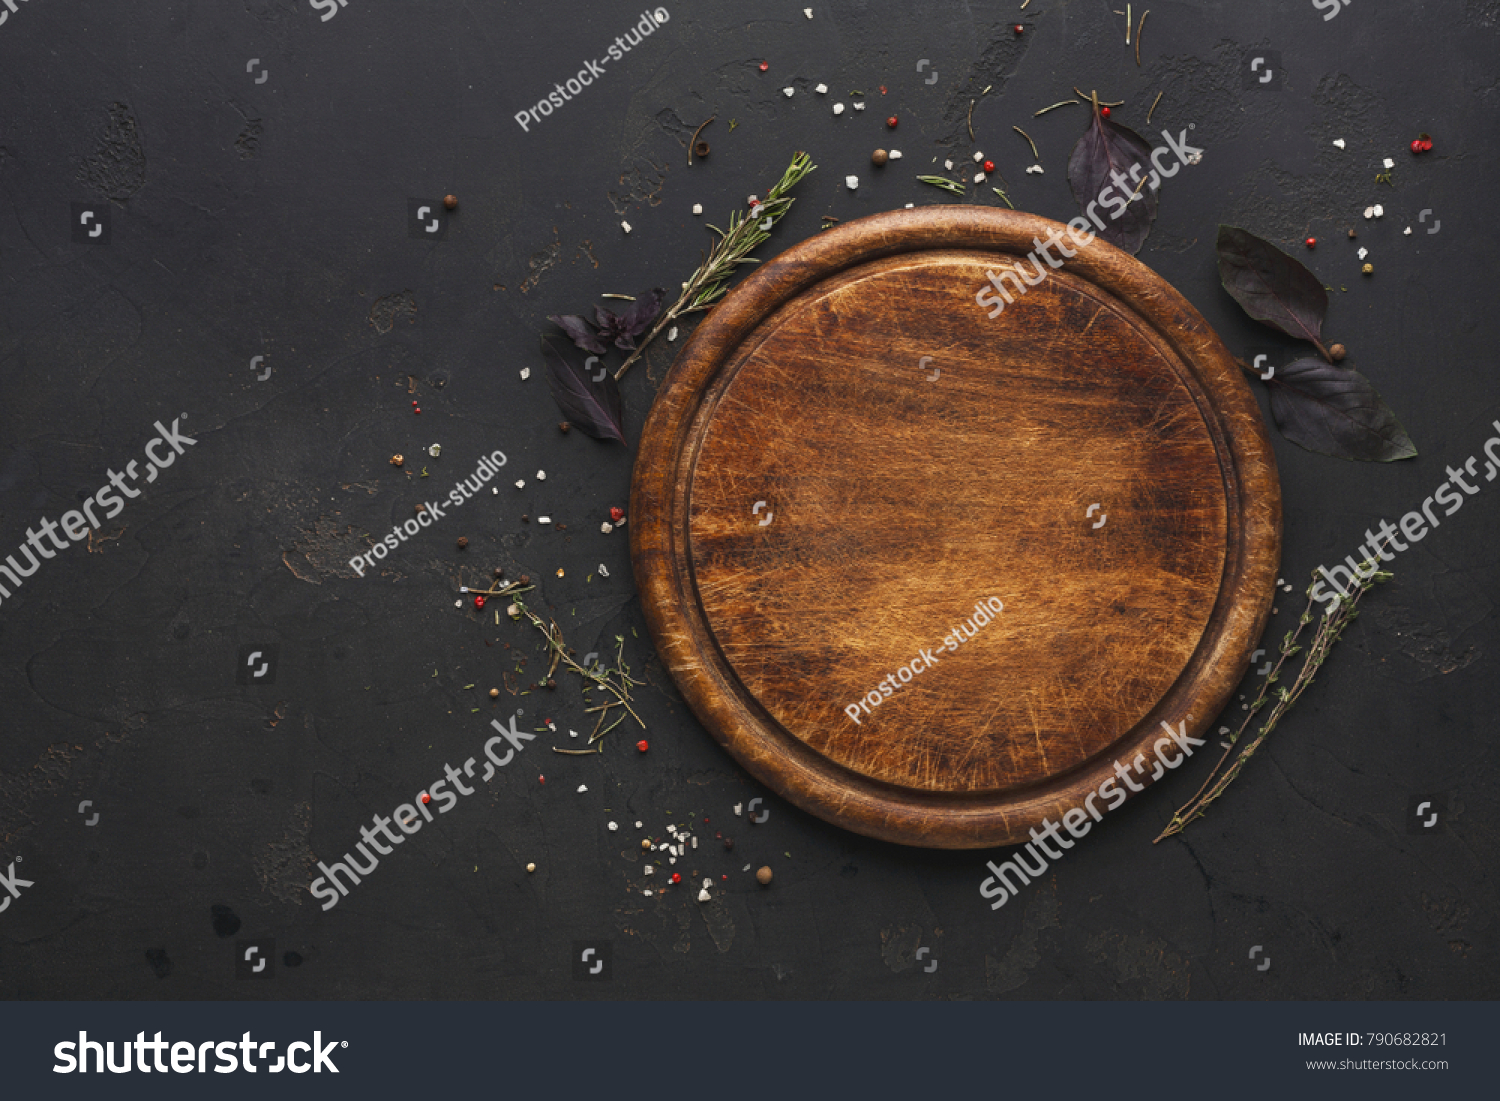 Round wooden plate with herbs and salt on dark wooden background top view #790682821